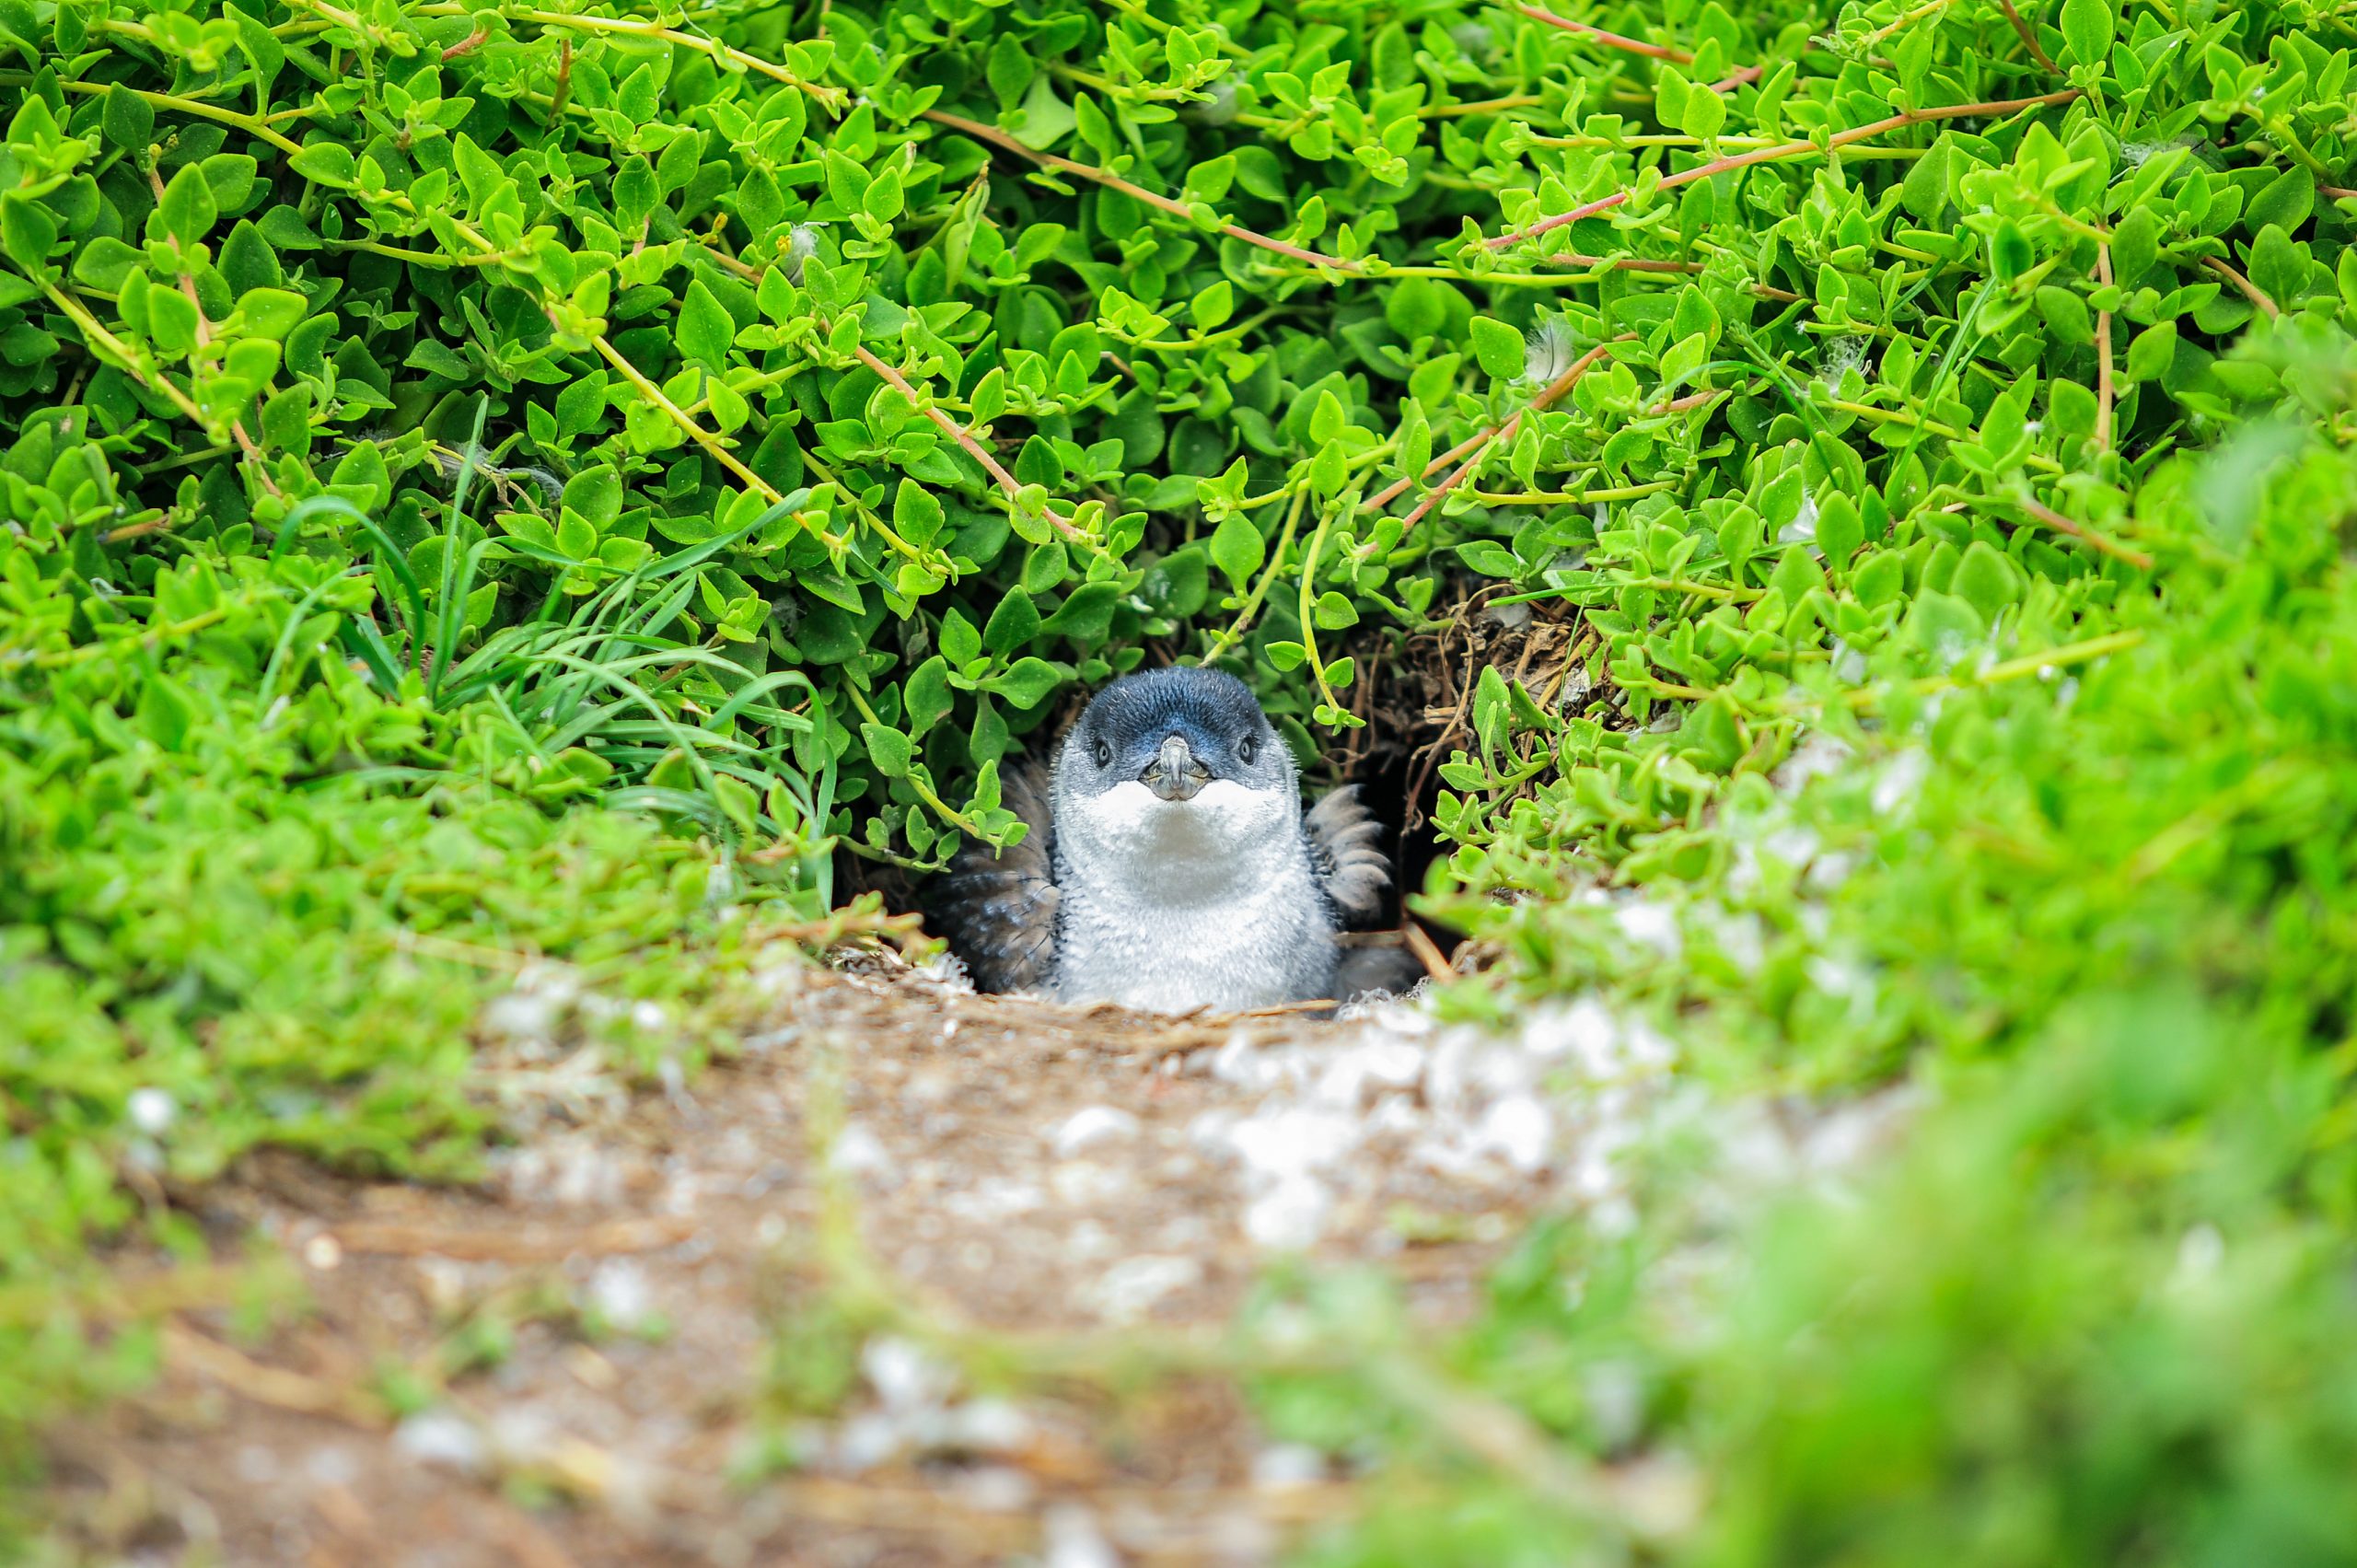 A Little Penguin popping out from it's hole on Phillip Island in Victoria, Australia.